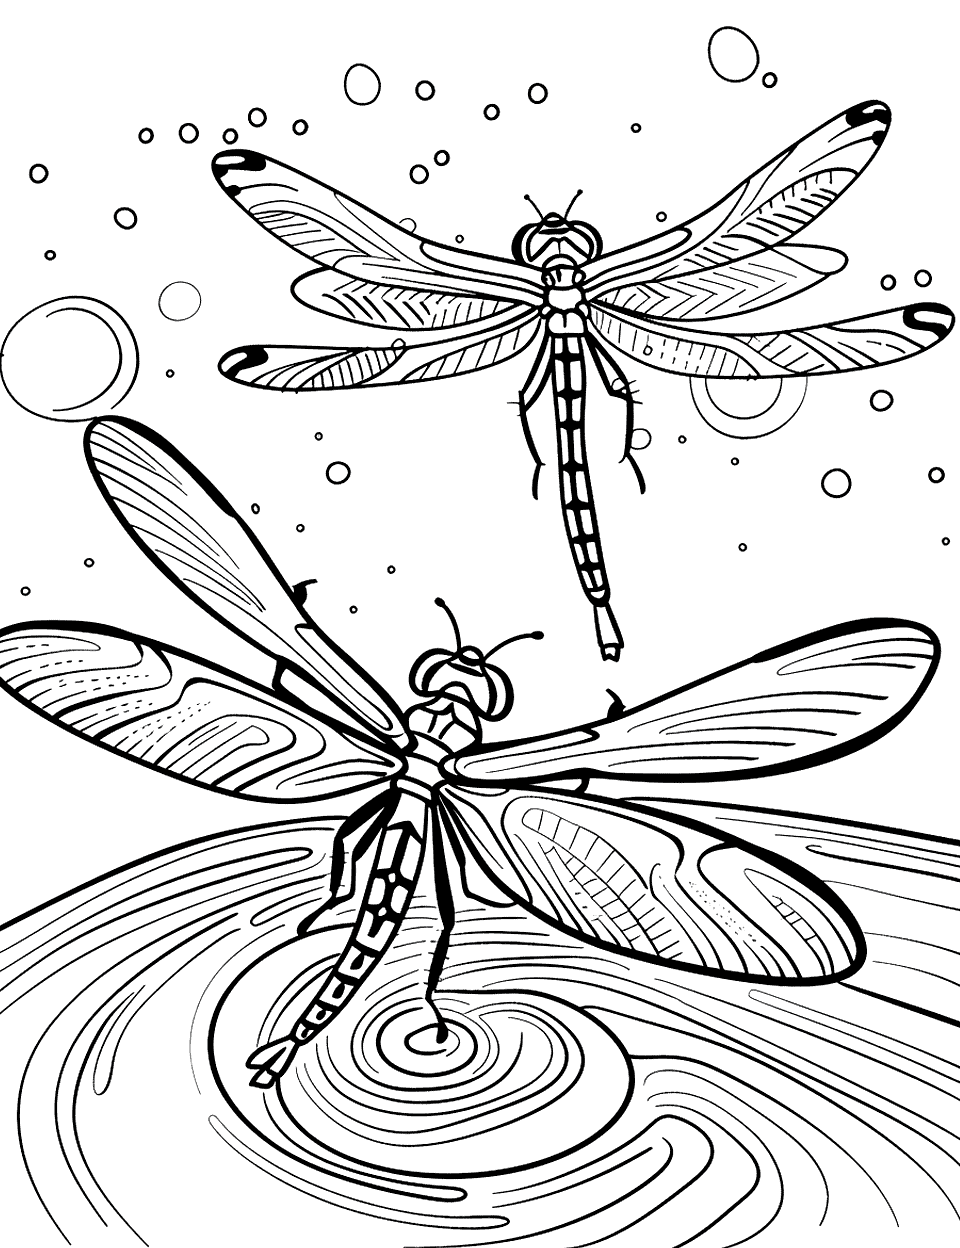 Dragonfly Pair Over Water Insect Coloring Page - Two dragonflies flying over a shimmering water surface.